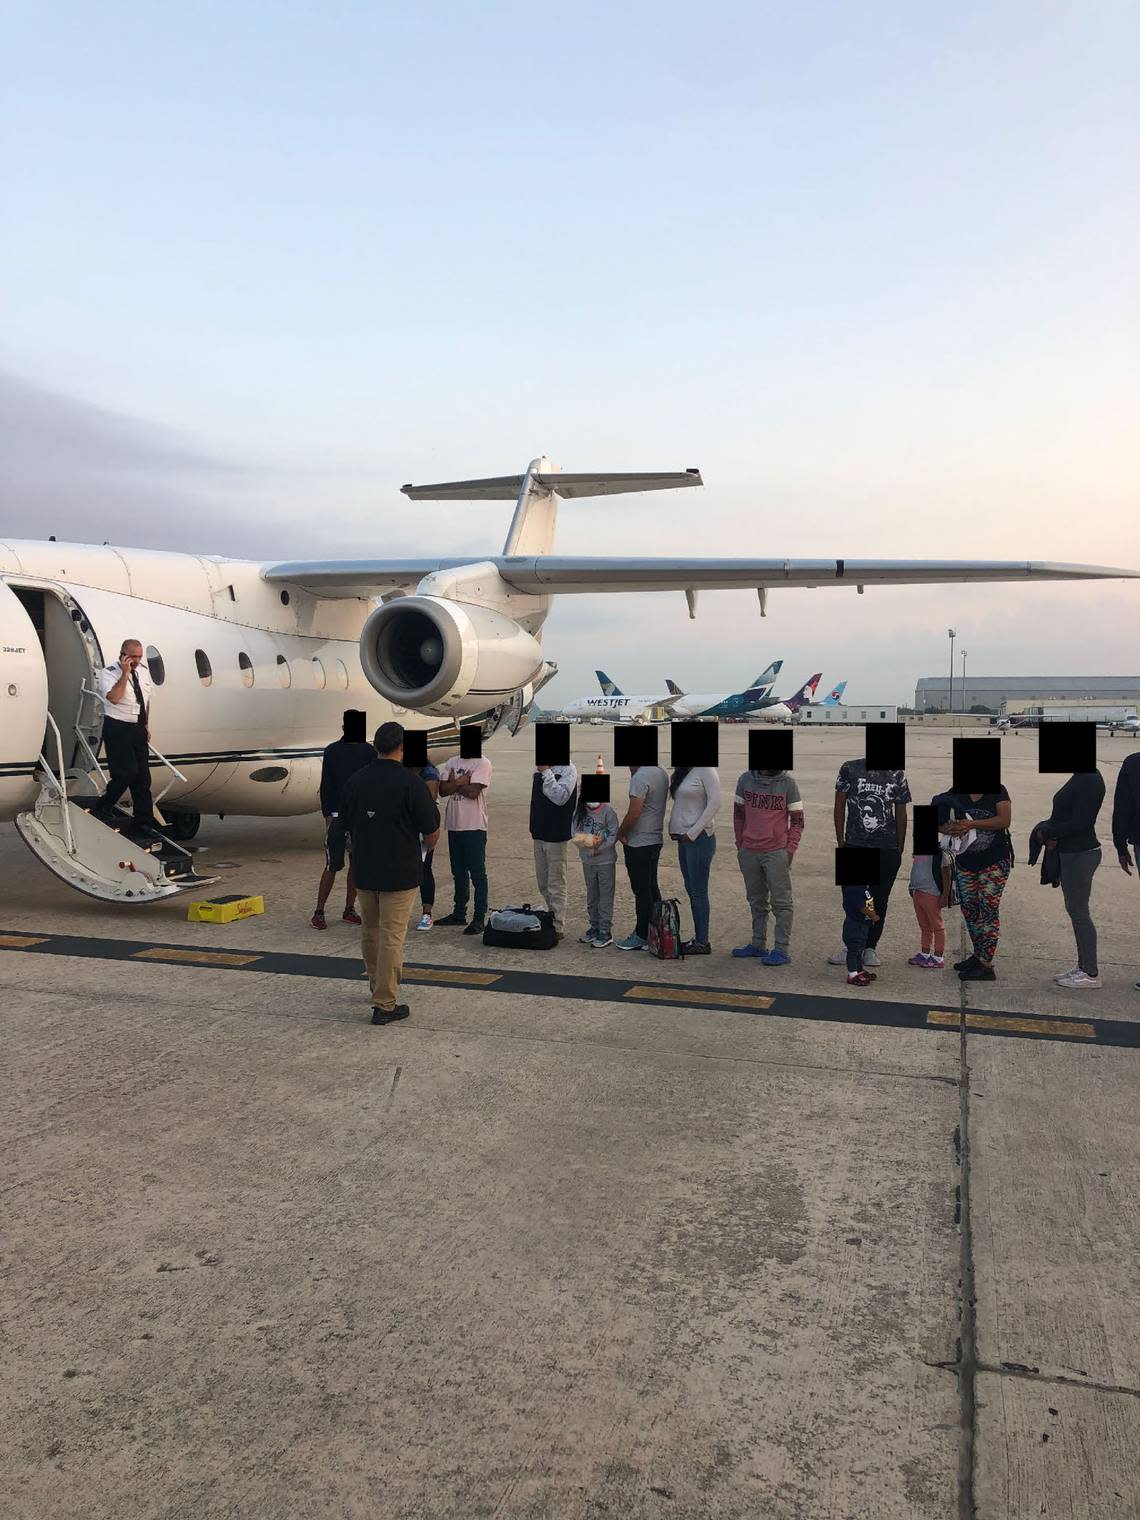 Migrants, their faces obscured, outside the plane that ferried them from Texas to Martha’s Vineyard, Massachusetts. Florida taxpayers paid for the charter.